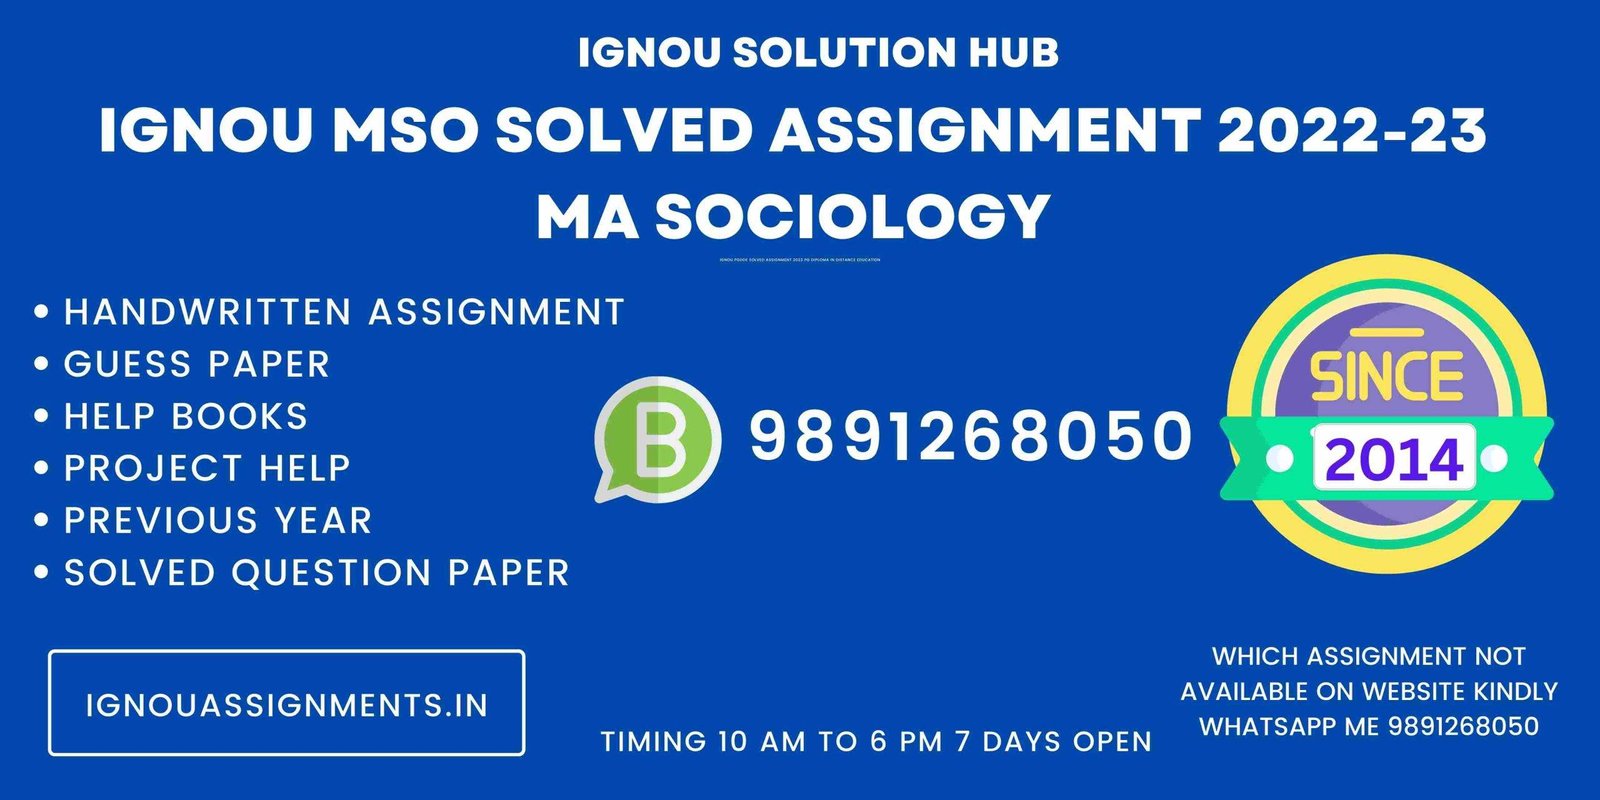 ignou sociology assignment answers